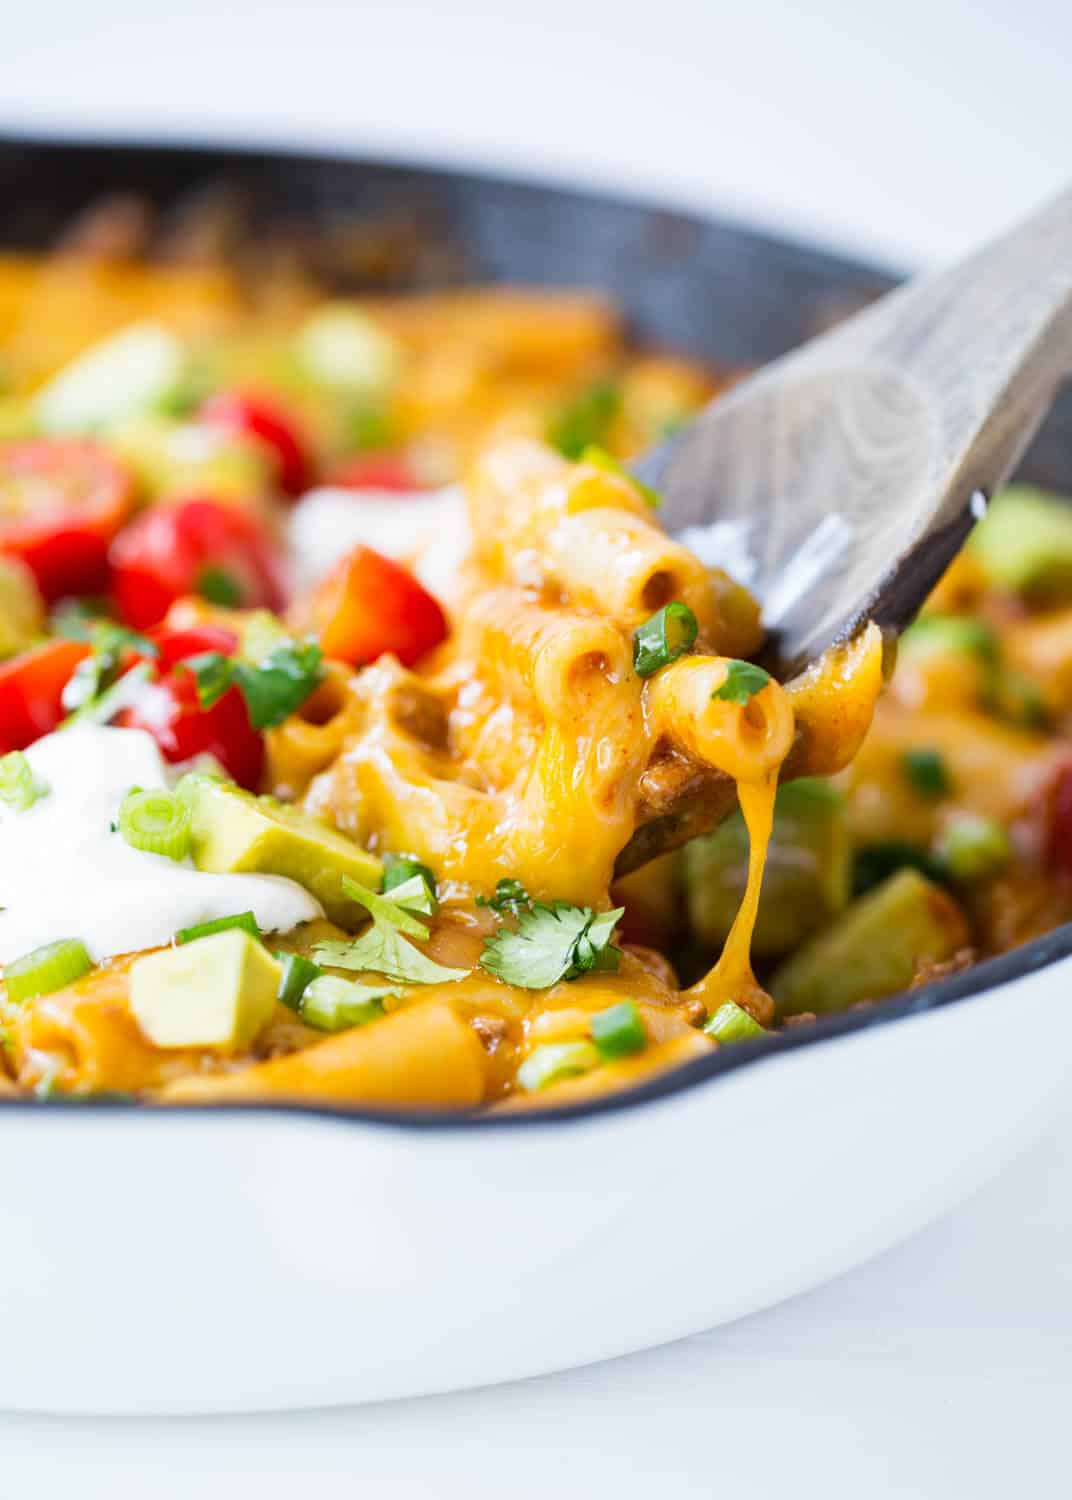 Scooping out cheesy enchilada pasta with a wooden spoon.